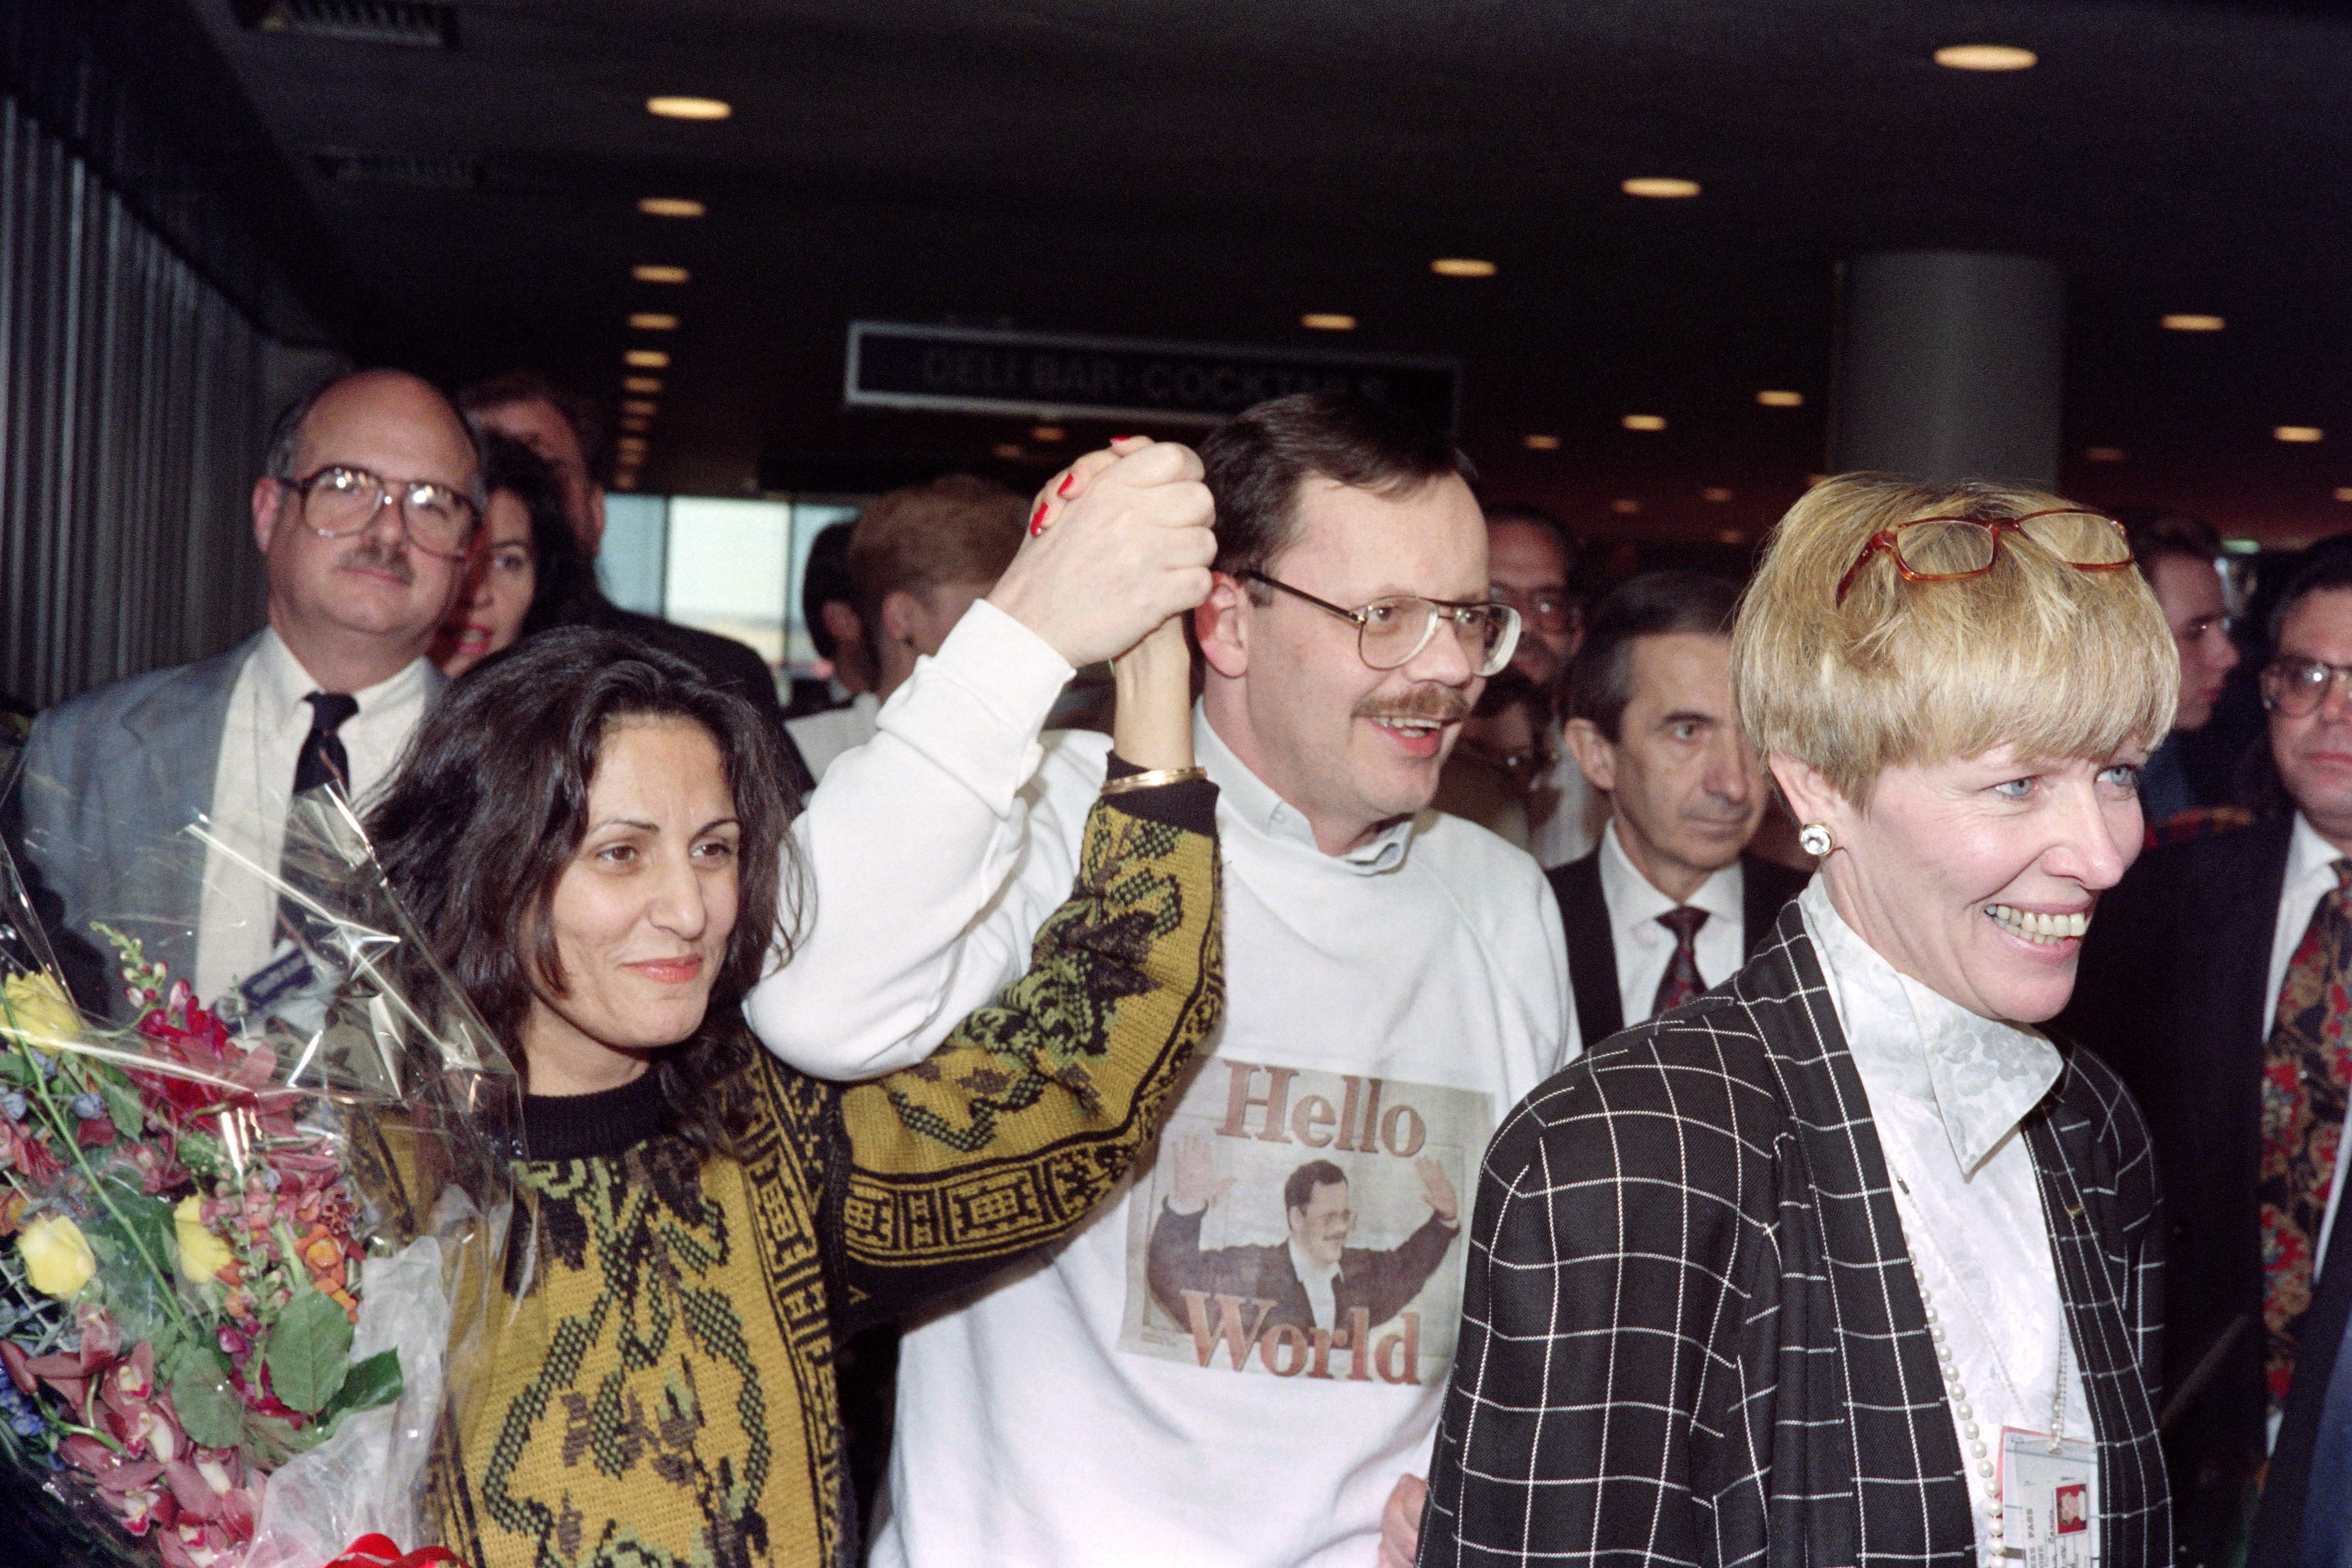 Former US hostage Terry Anderson and his fiancée Madeleine Bassil arrive at John F Kennedy Airport on 10 December 1991